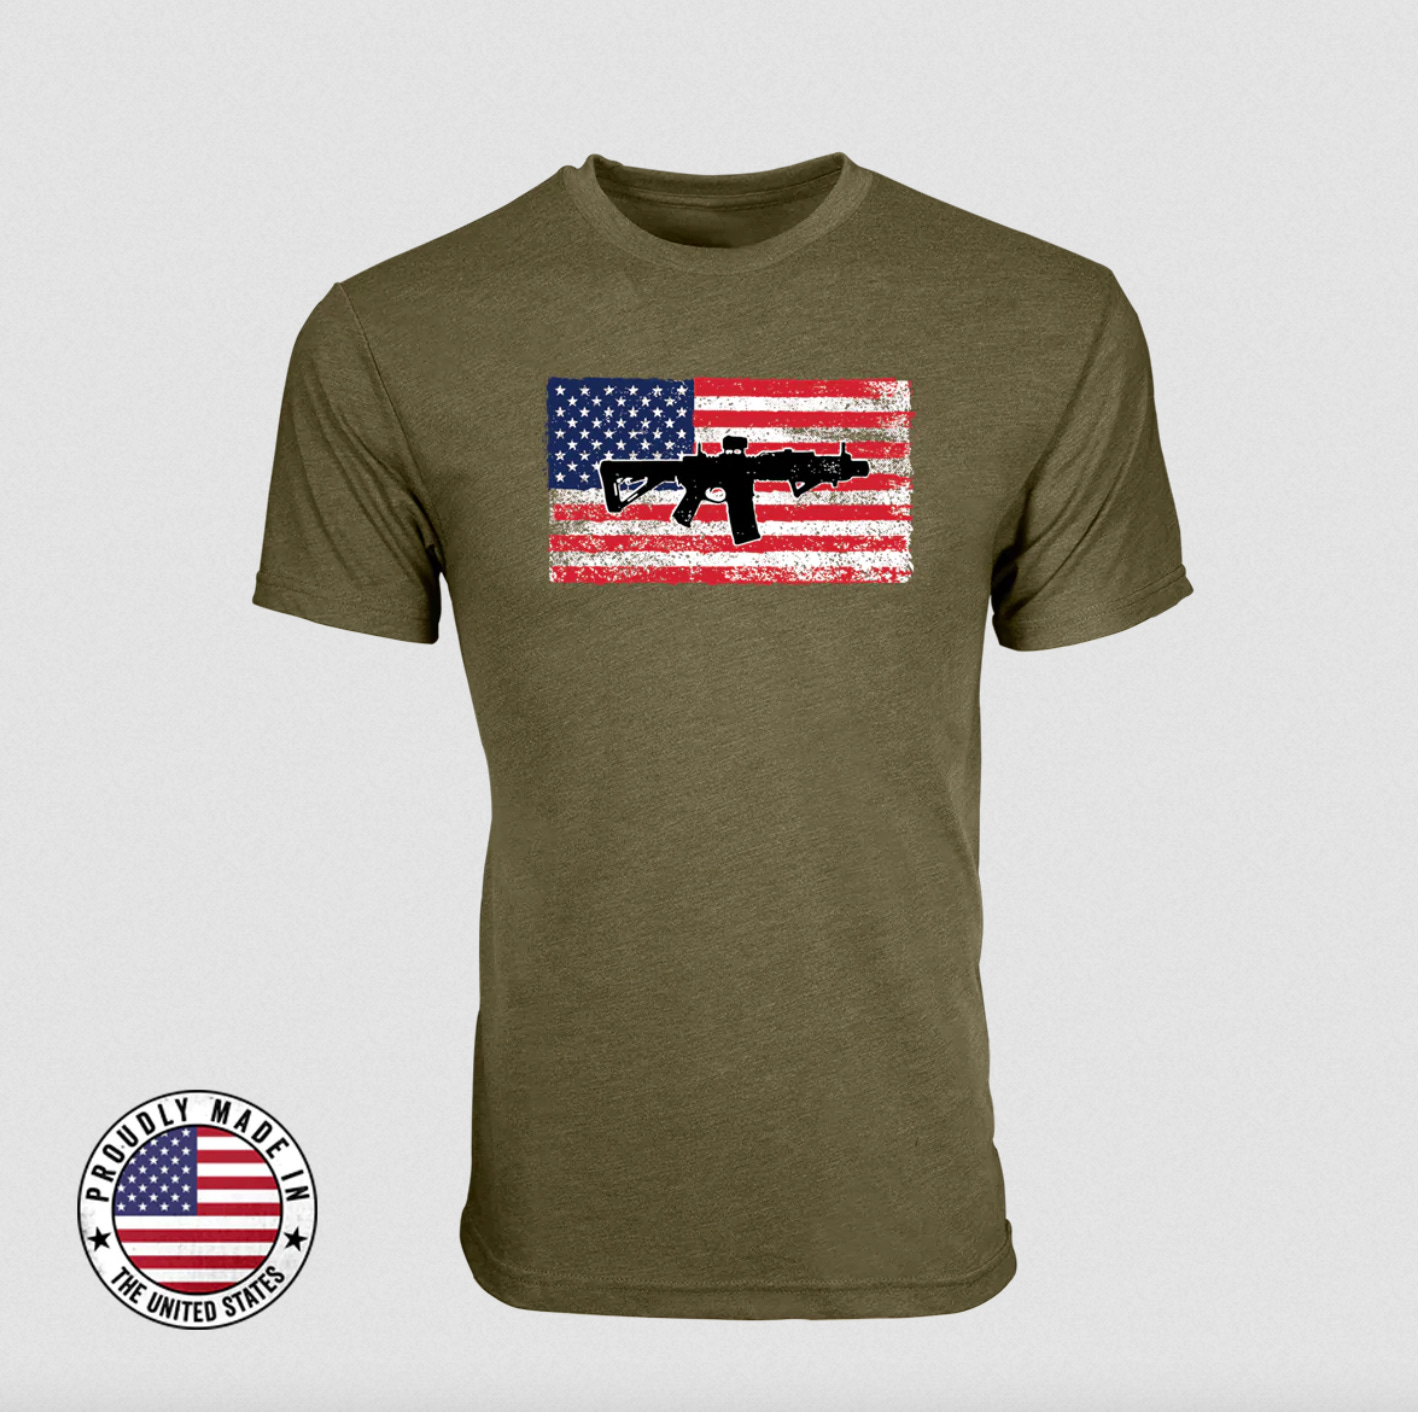 An image of a t-shirt with an assault rifle on top of an american flag.